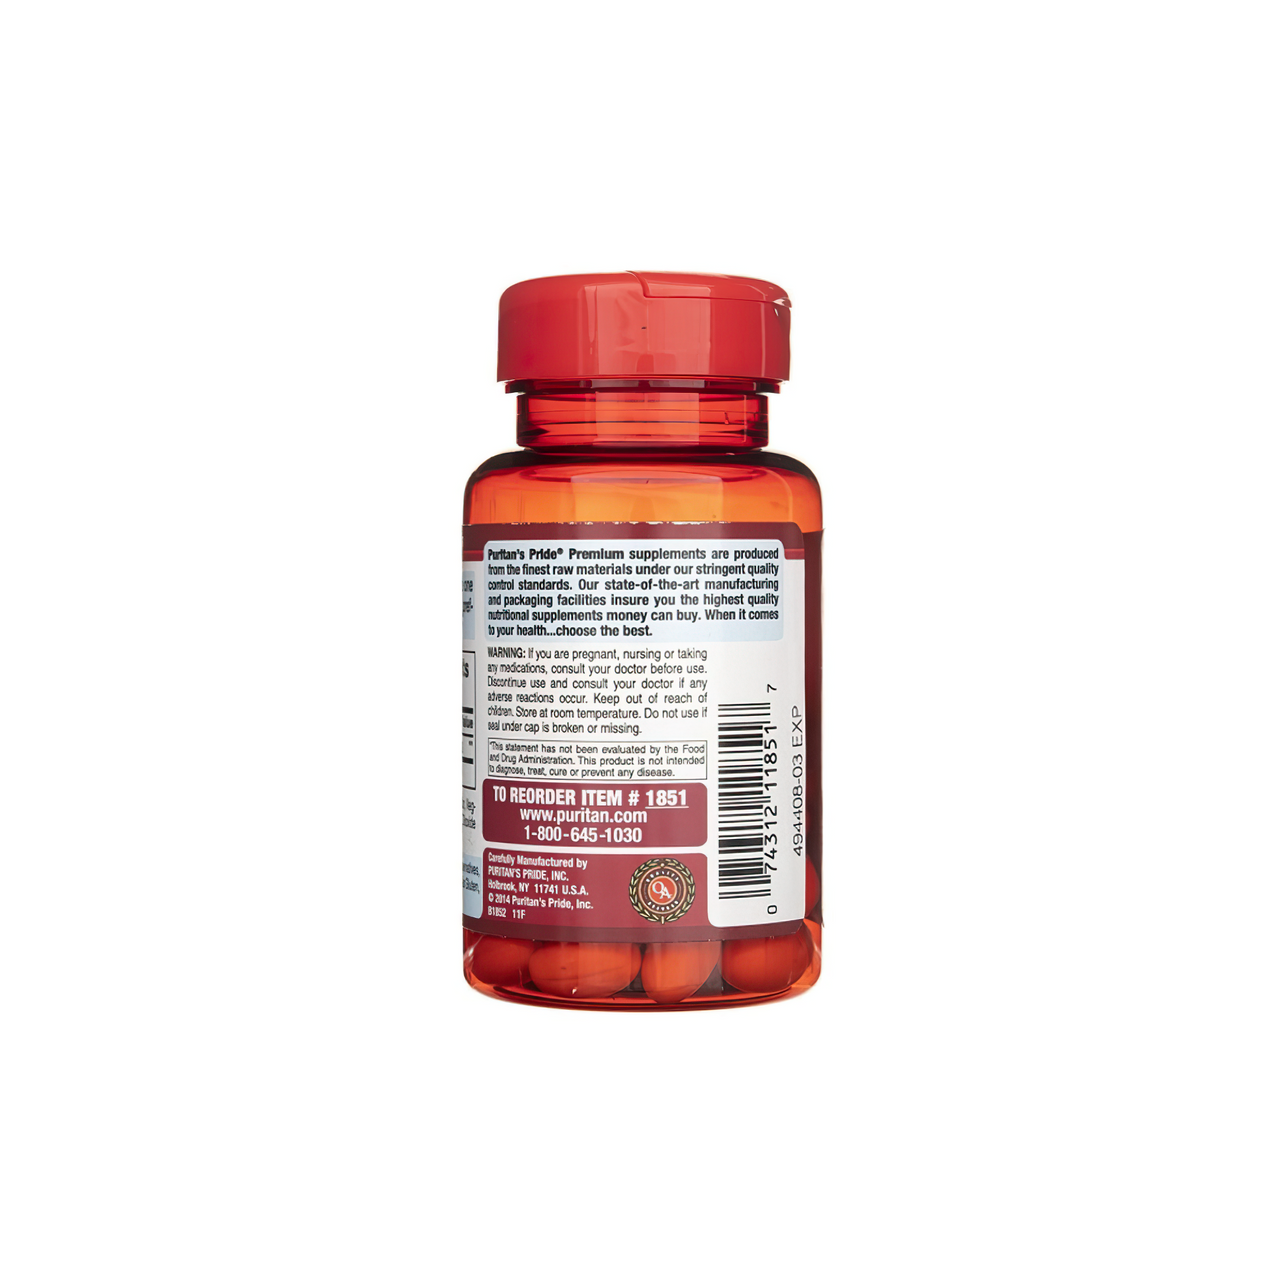 A bottle of Coenzyme Q10 - 120 mg 60 Rapid Release softgels by Puritan's Pride on a white background.